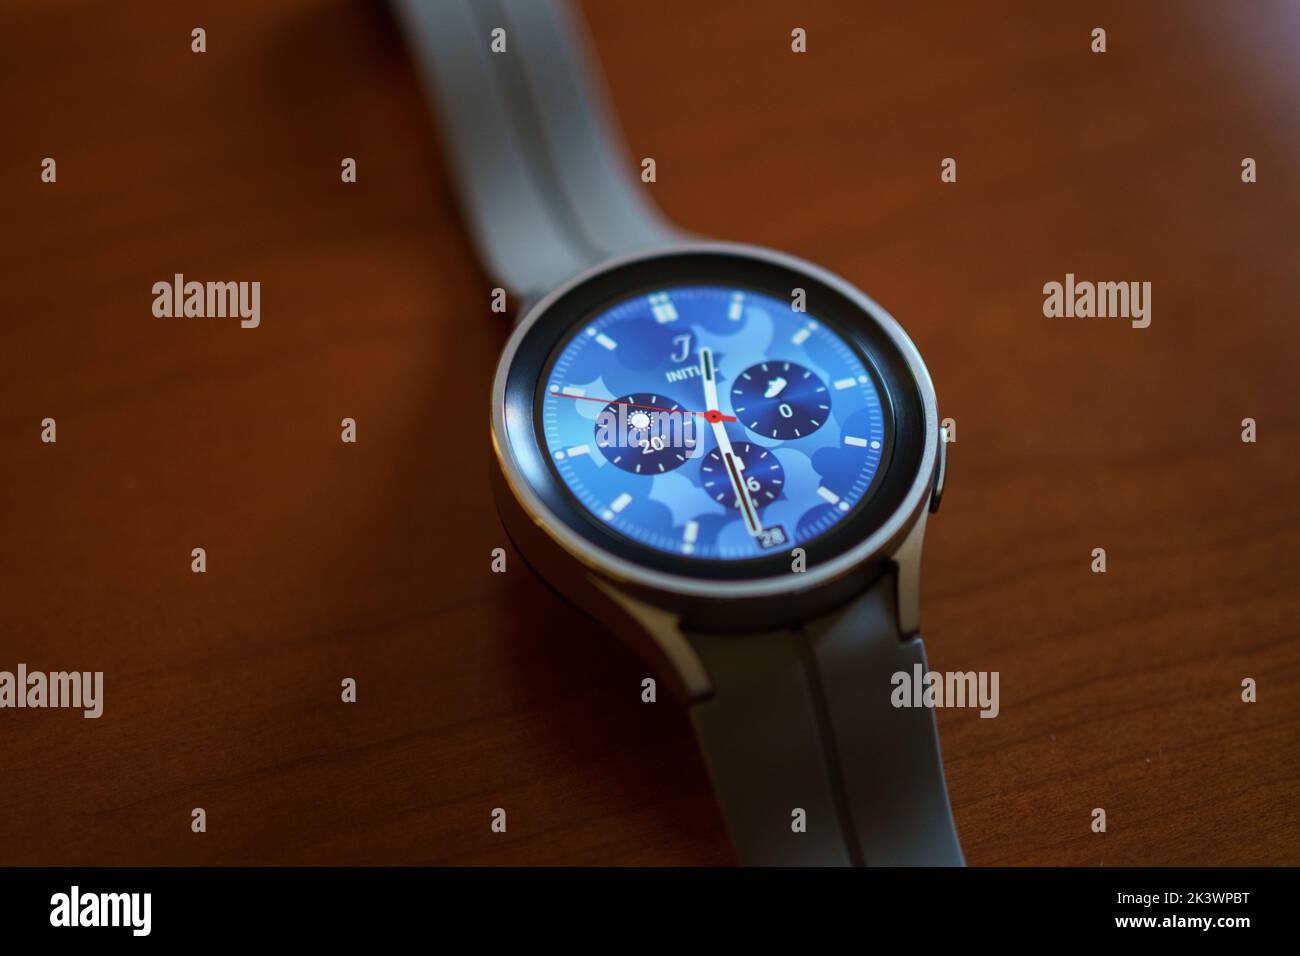 Granada, Andalusia, Spain - September 28, 2022: New Samsung Watch 5 Pro Stock Photo